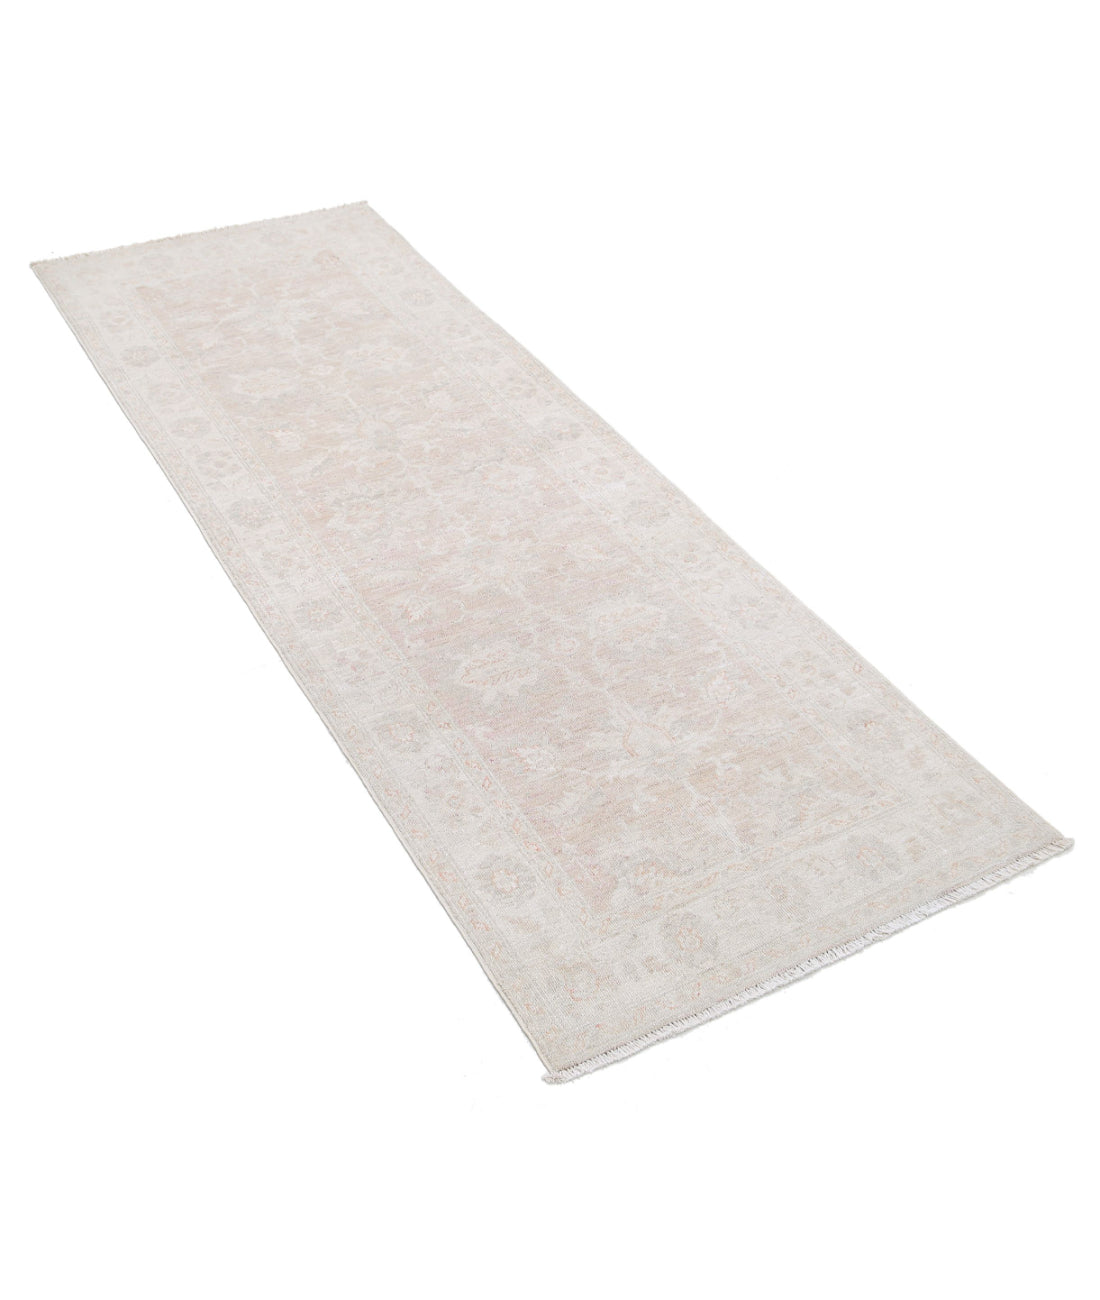 Hand Knotted Serenity Wool Rug - 2'6'' x 6'8'' 2'6'' x 6'8'' (75 X 200) / Taupe / Ivory